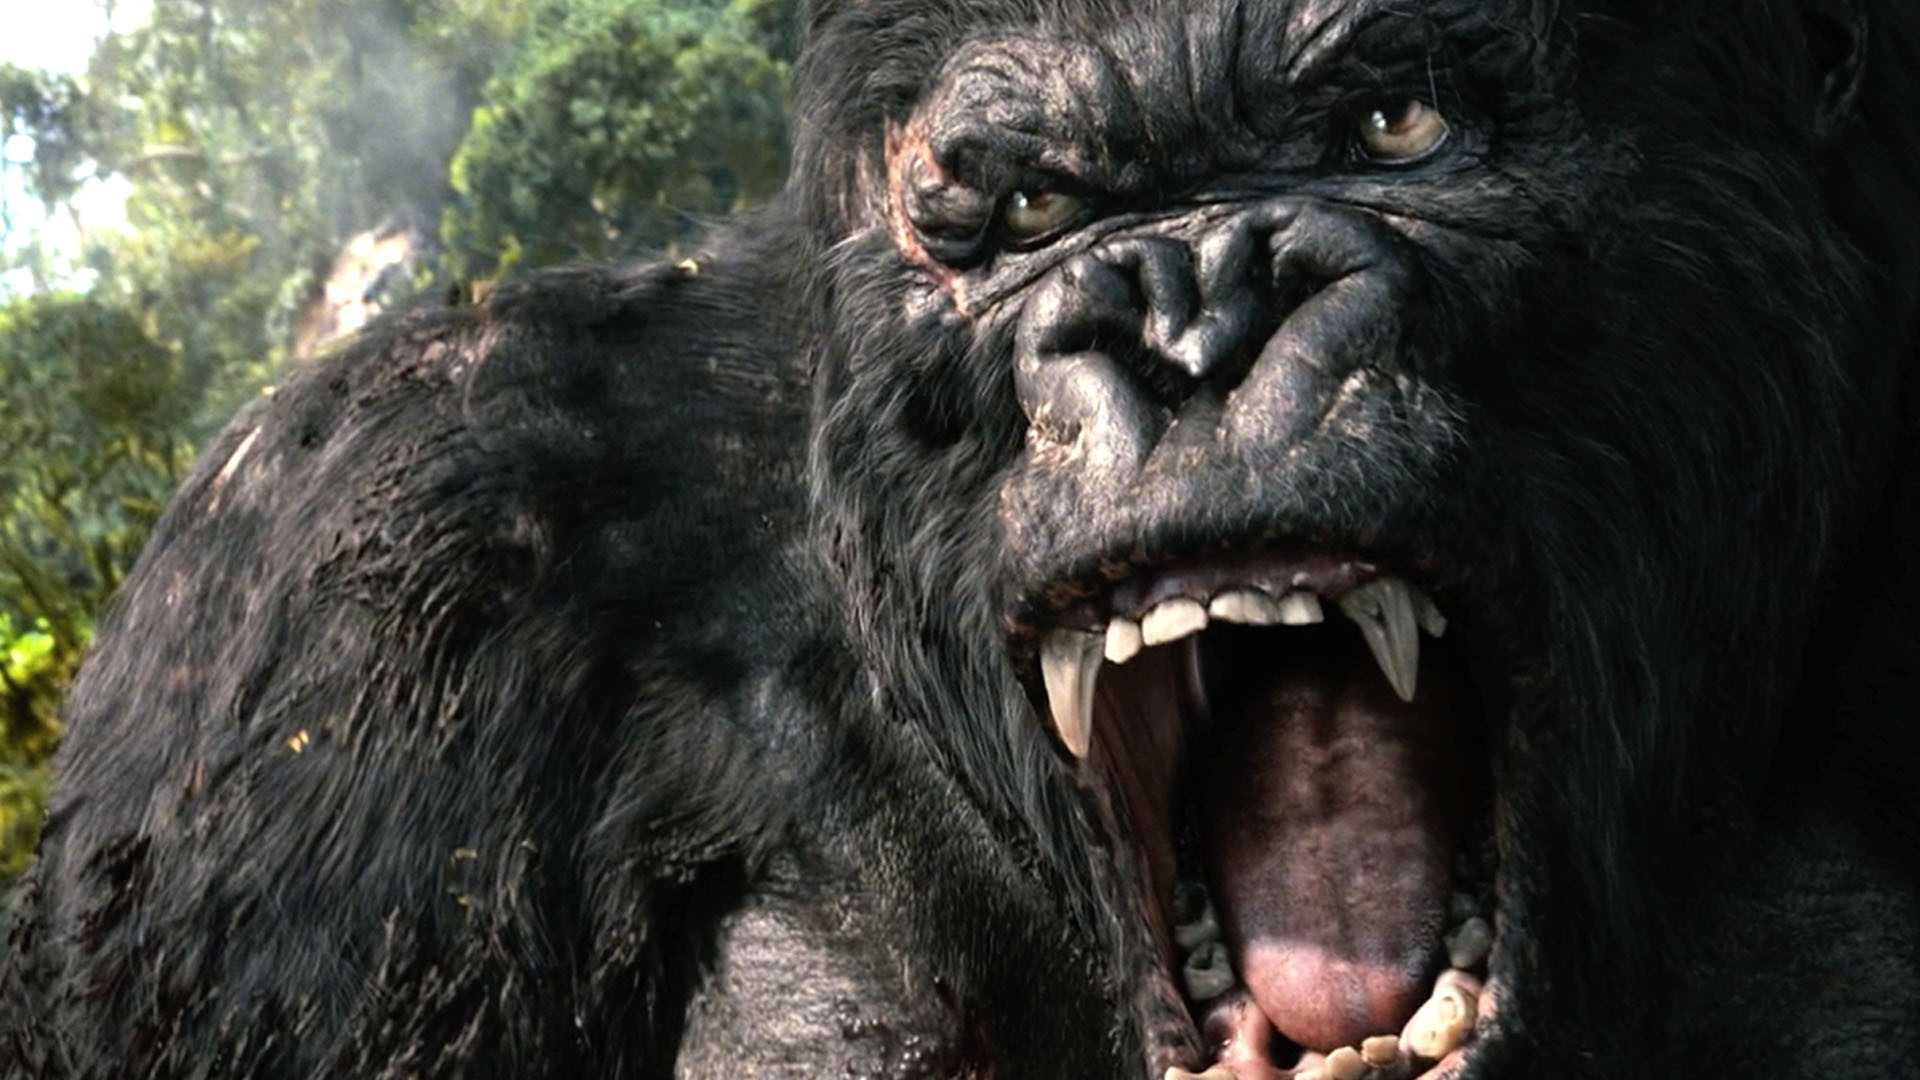 King Kong: The object of worship by the derelict human tribe on the Skull Island. 1920x1080 Full HD Wallpaper.